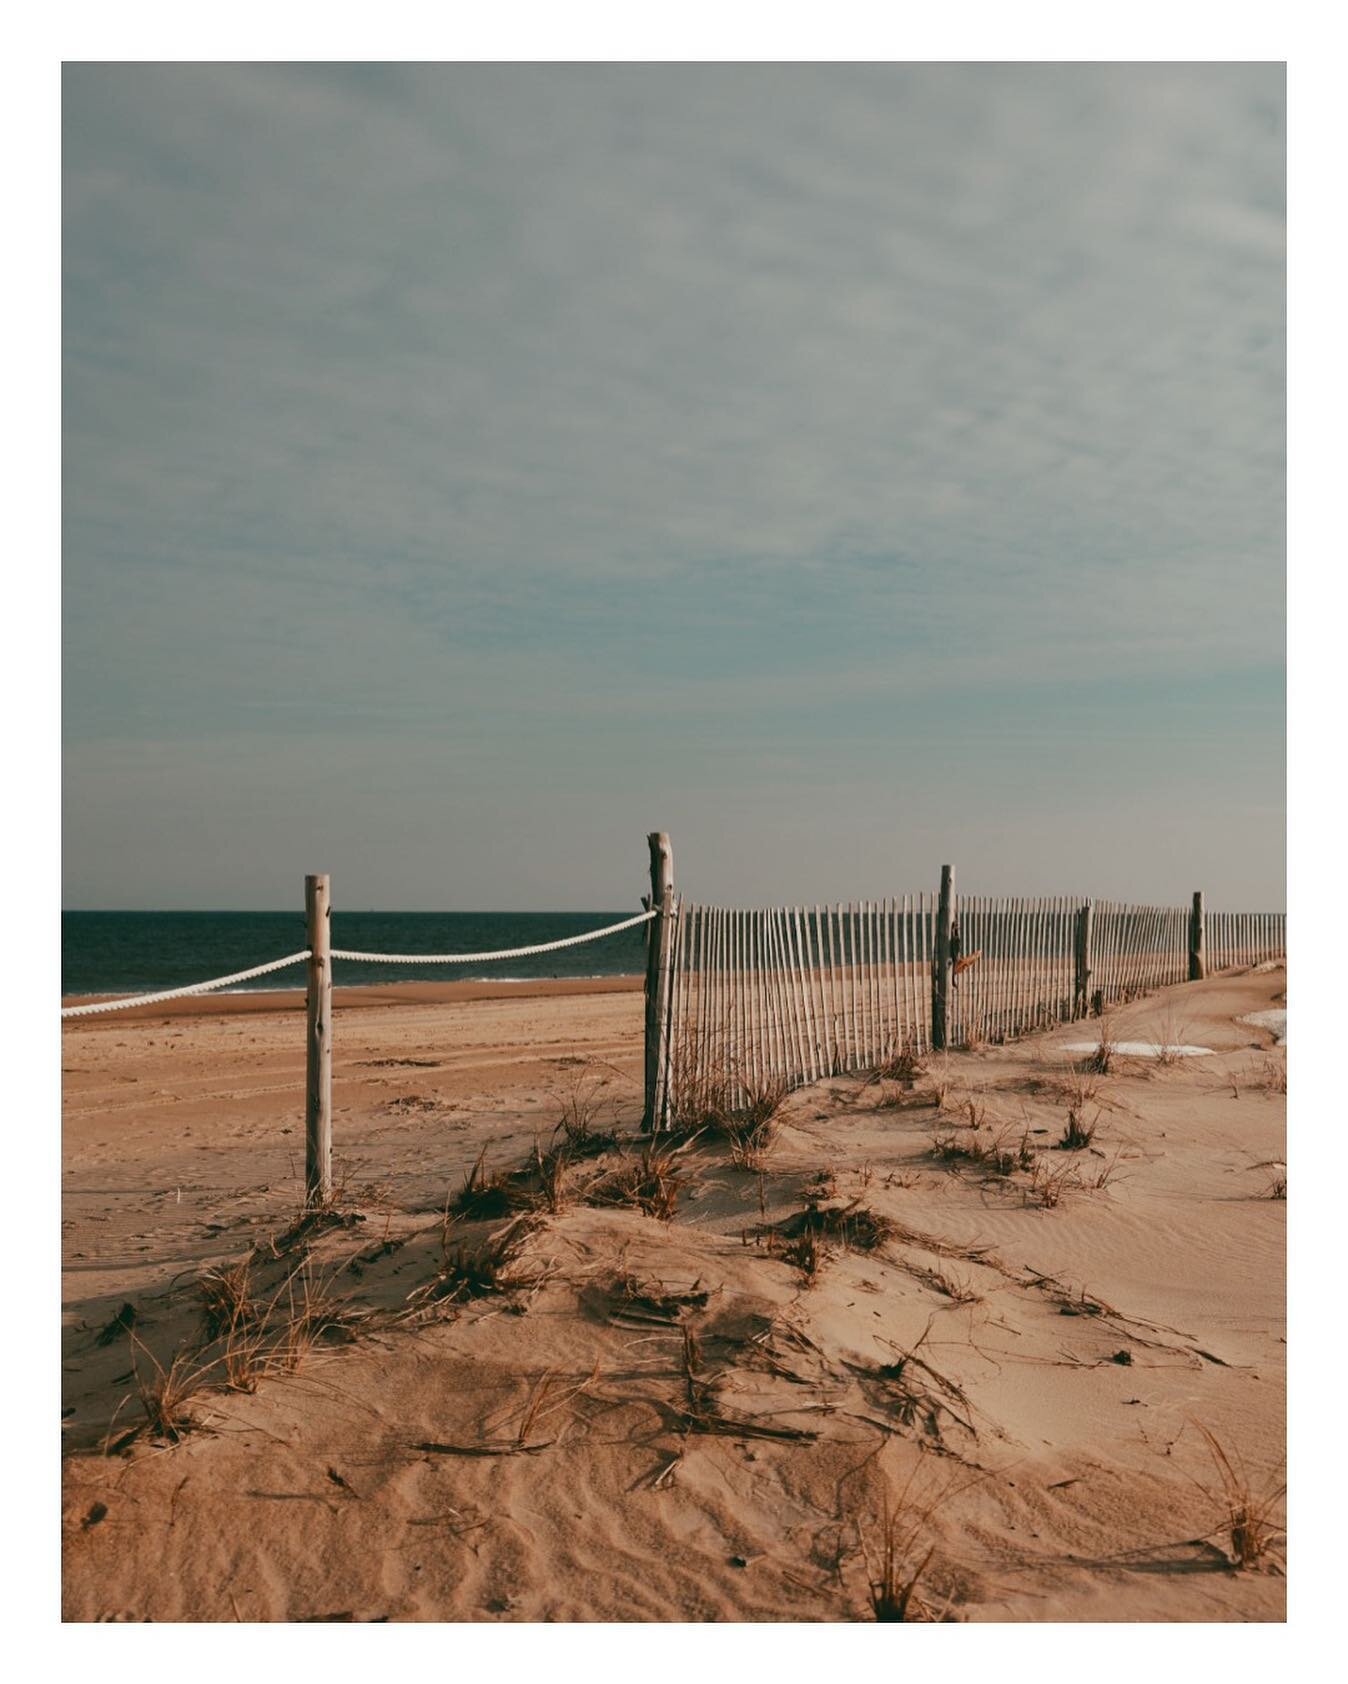 Dreaming of warmer beach visits 🏝 
Heading to Charleston in April for our annual trip and counting down the days. 

#winterbeachdays #capehenlopen #beaches #delaware #landscape #landscapephotography #sussexcounty #lewesdelaware